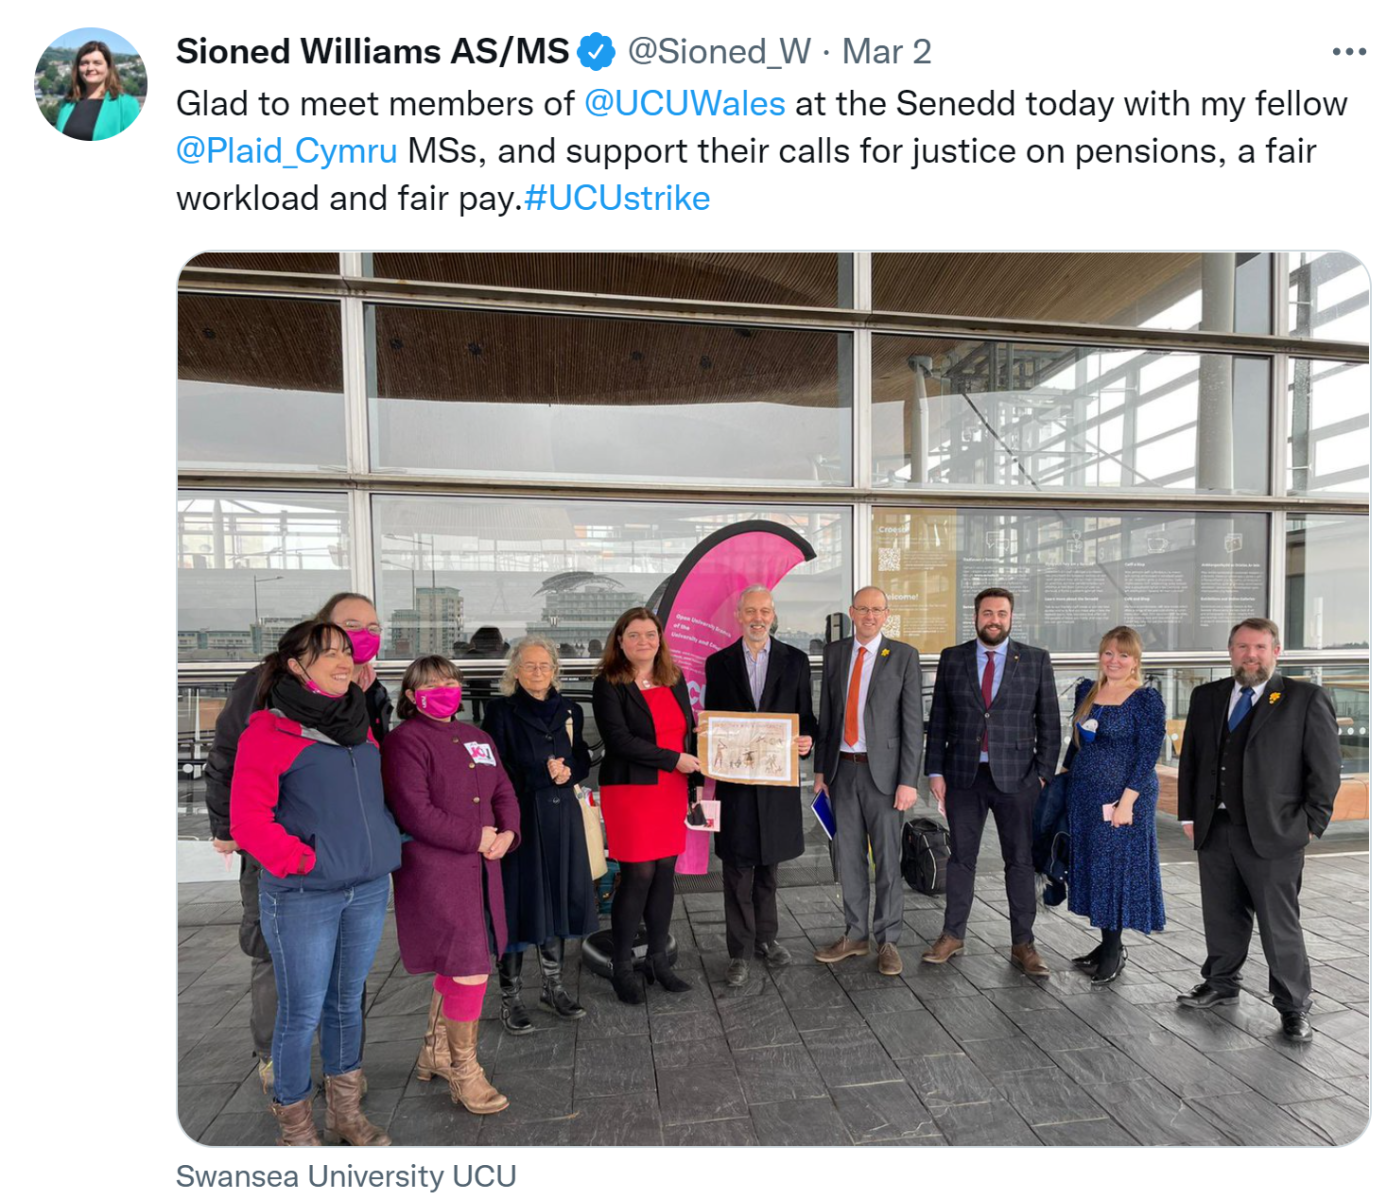 Sioned Williams tweets in support of the strike